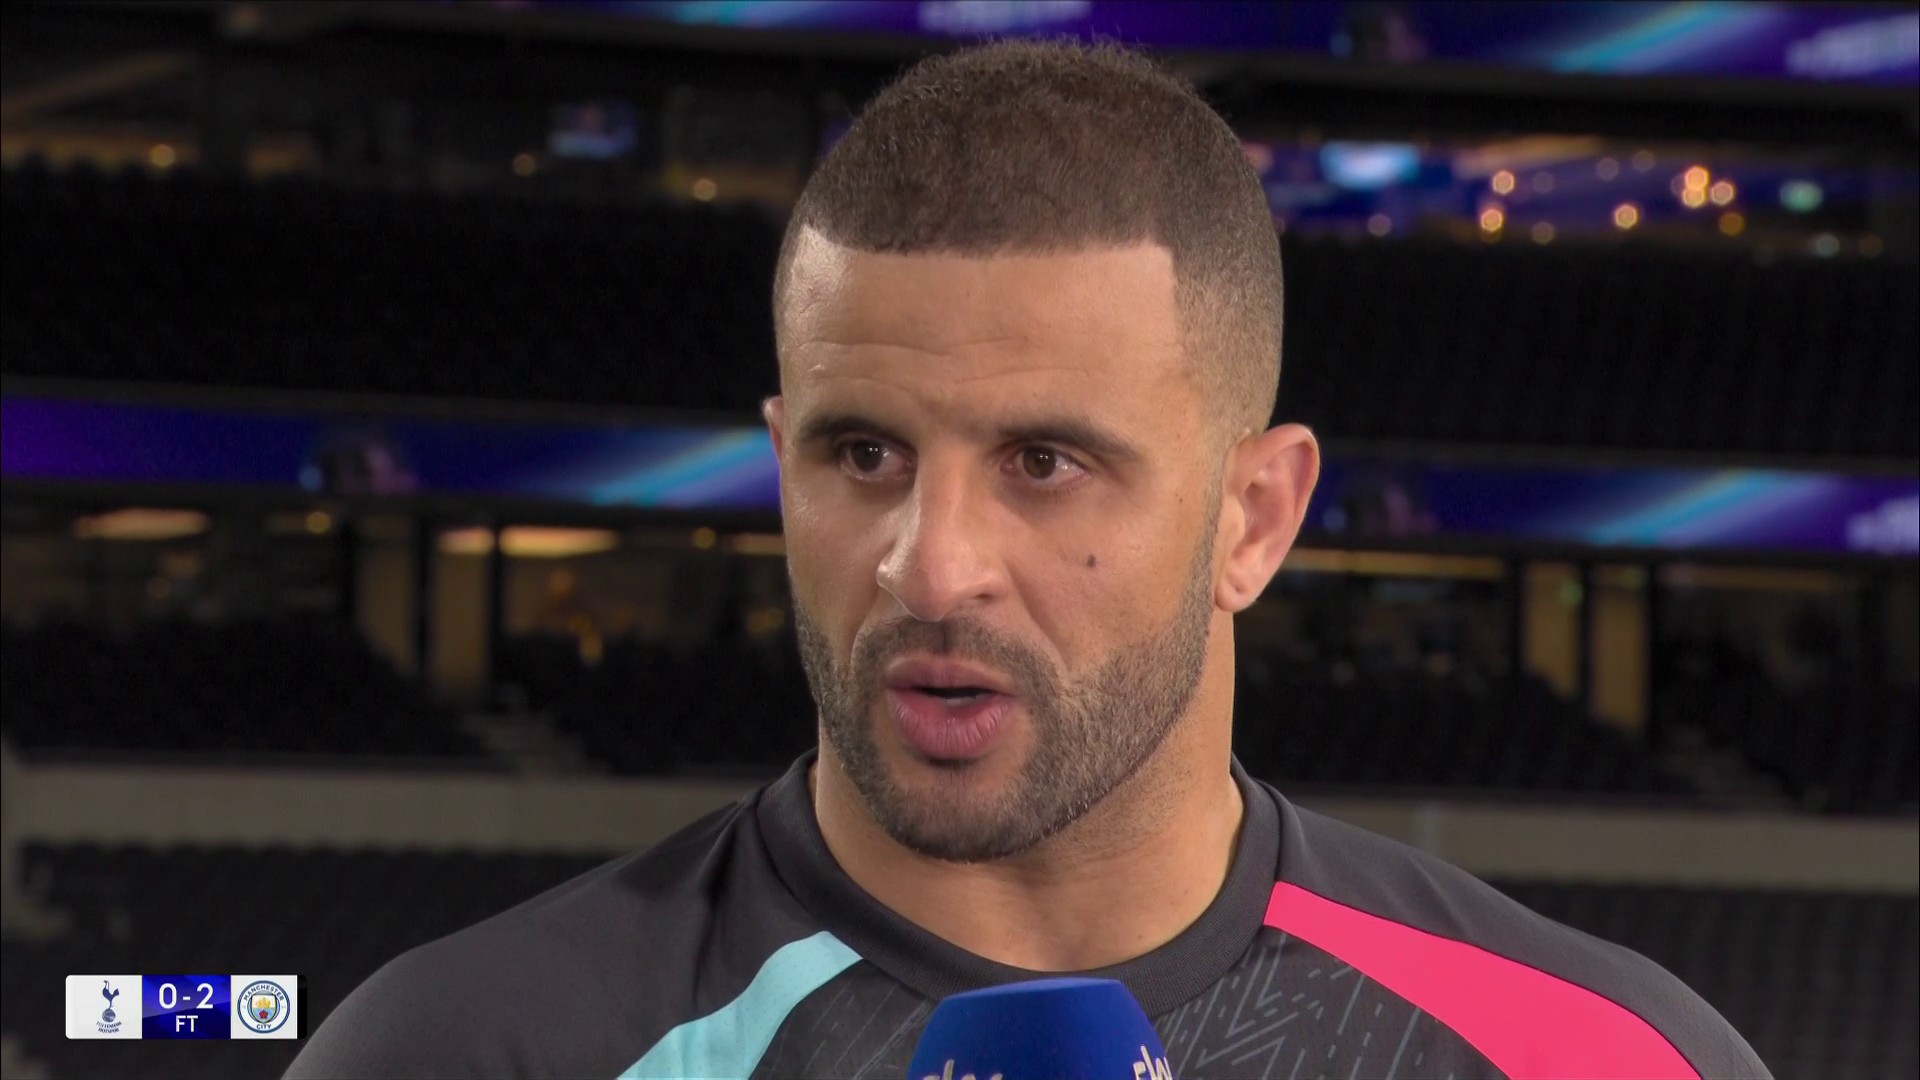 Kyle Walker confirmed Arsenal fans' attempts to disrupt Manchester City's sleep failed